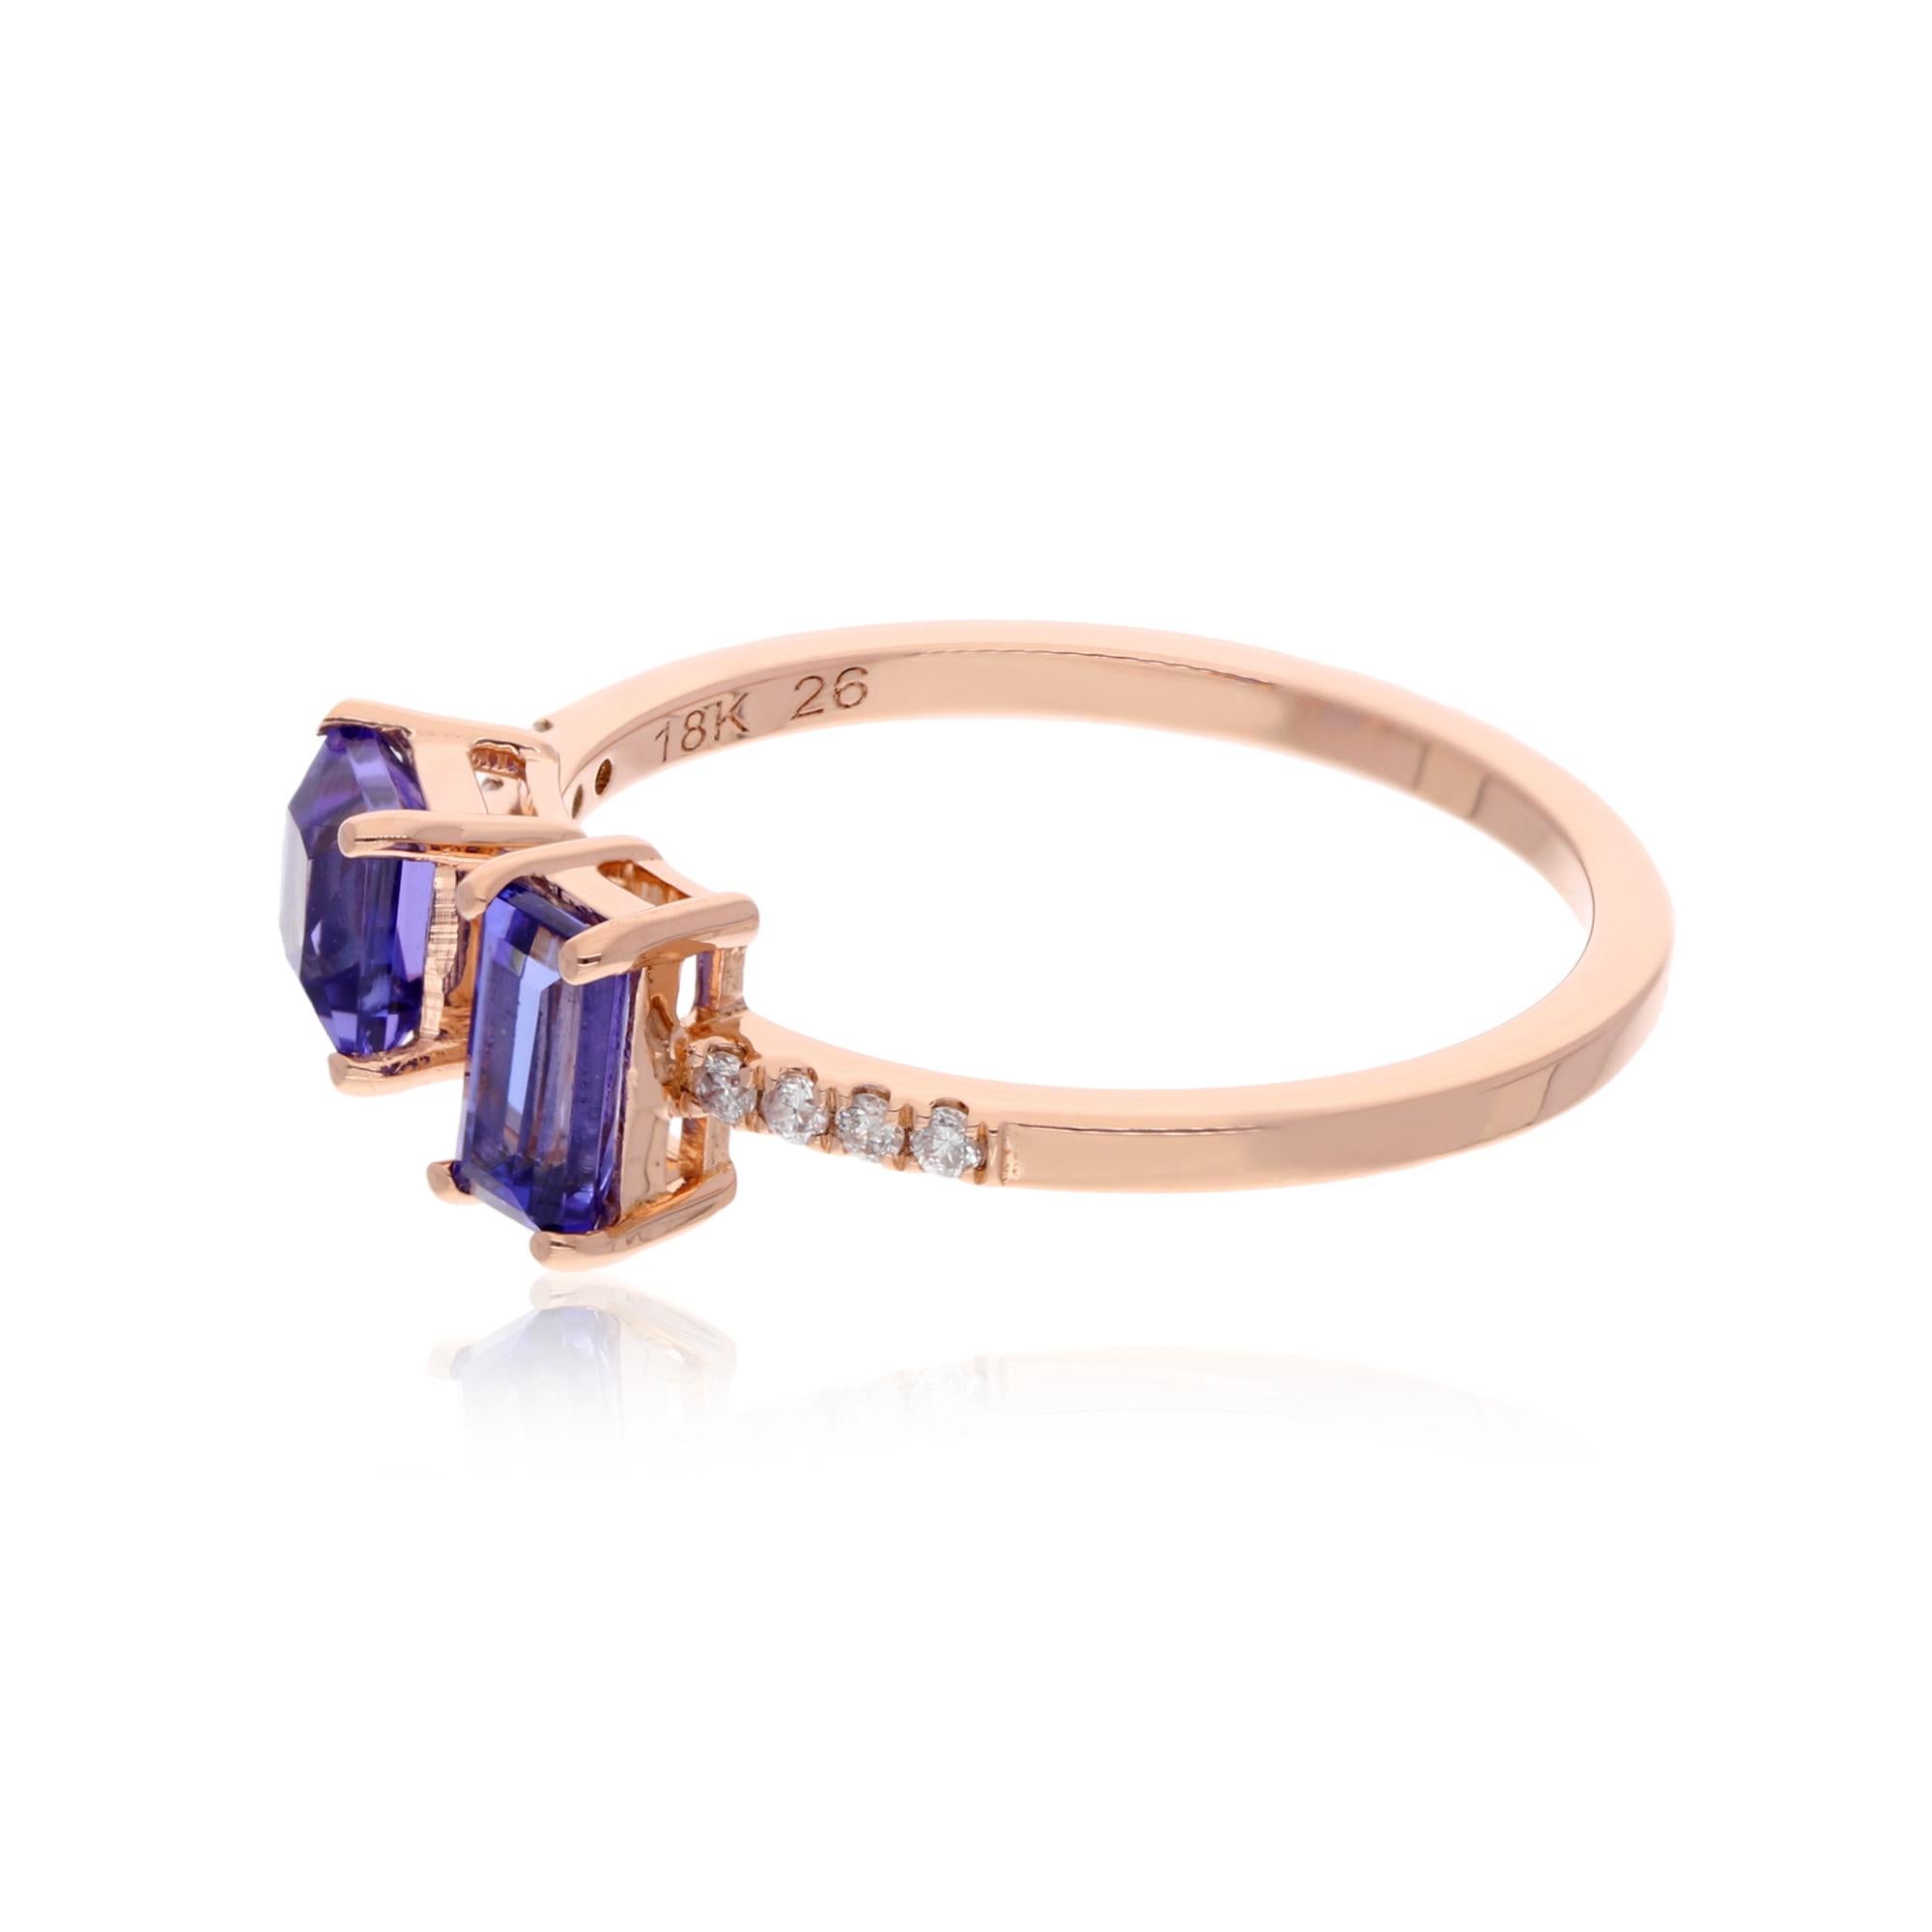 Item Code :- SER-22357
Gross Wt. :- 2.47 gm
18k Solid Rose Gold Wt. :- 2.23 gm
Natural Diamond Wt. :- 0.07 Ct. ( AVERAGE DIAMOND CLARITY SI1-SI2 & COLOR H-I )
Tanzanite Wt. :- 1.13 Ct
Ring Size :- 7 US & All size available

✦